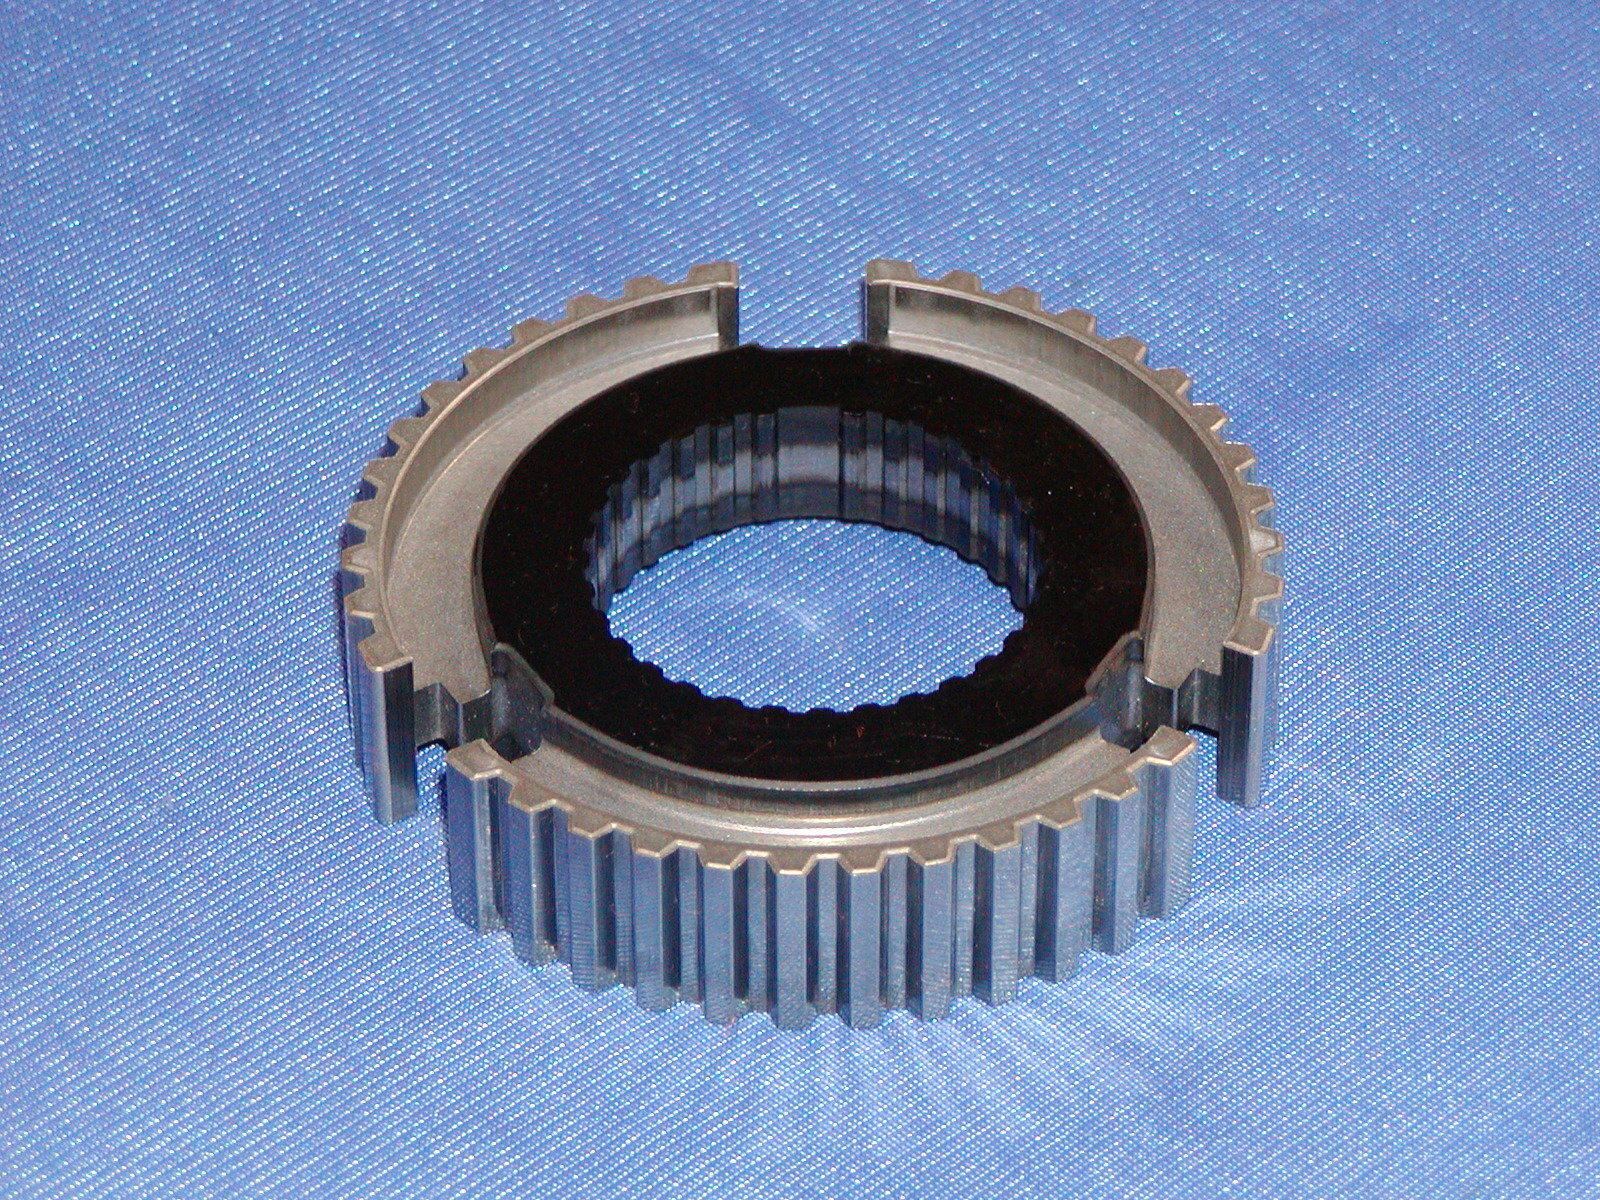 Mass production of high-precision clutch hub that contributes to improved operation feeling